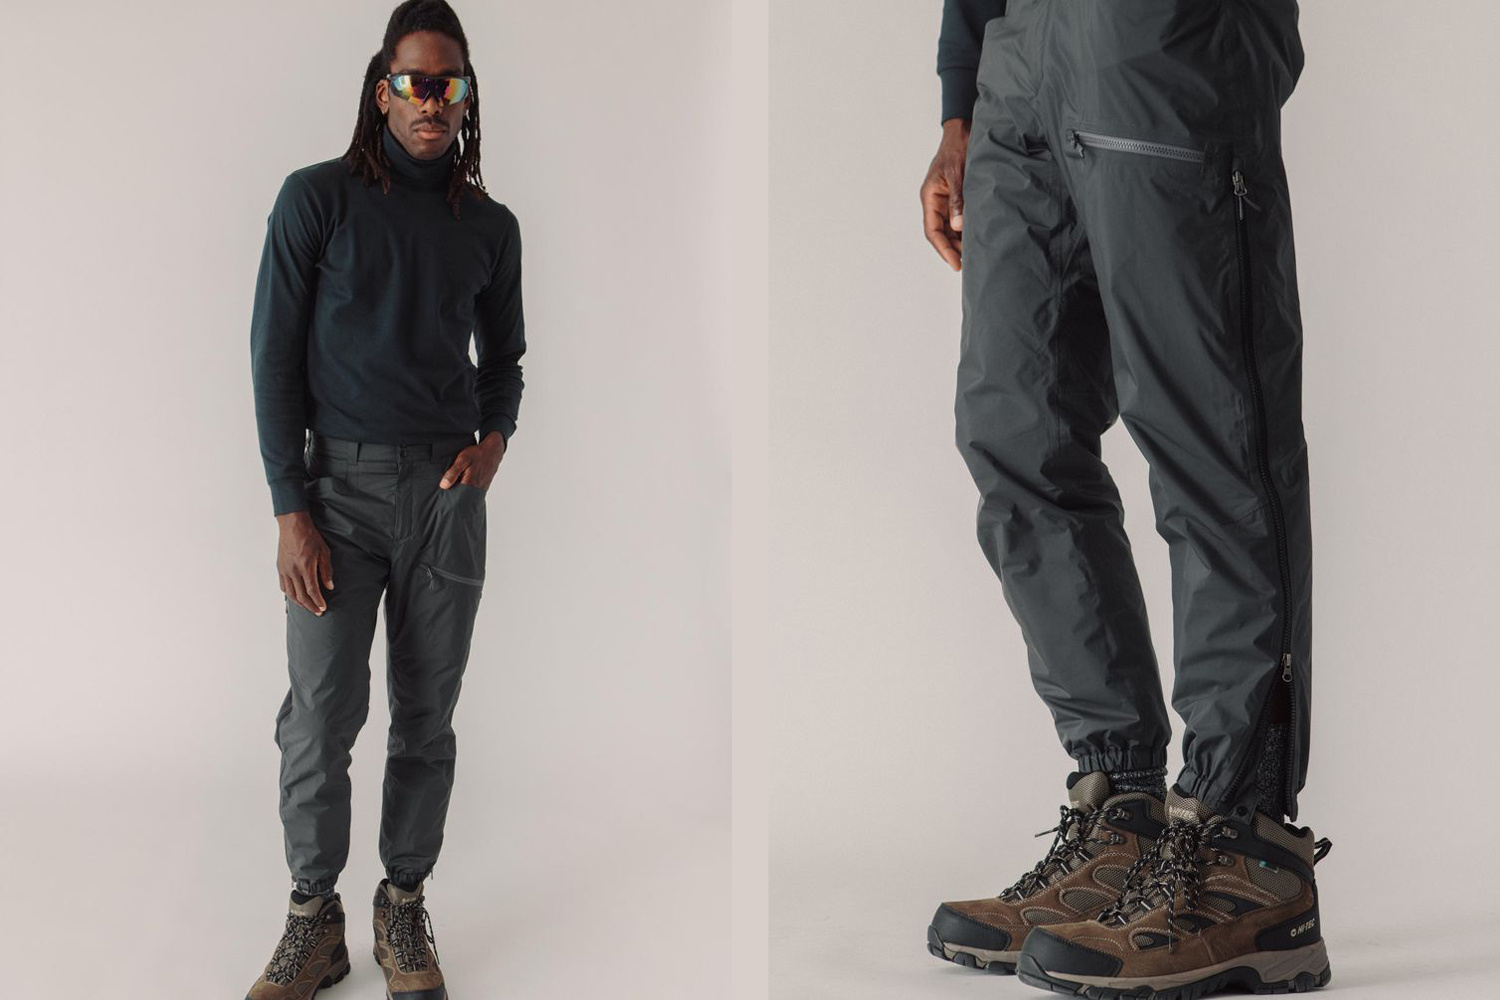 The LifeLabs WarmLife Pant is a versatile, capable pair of winter pants in 2022